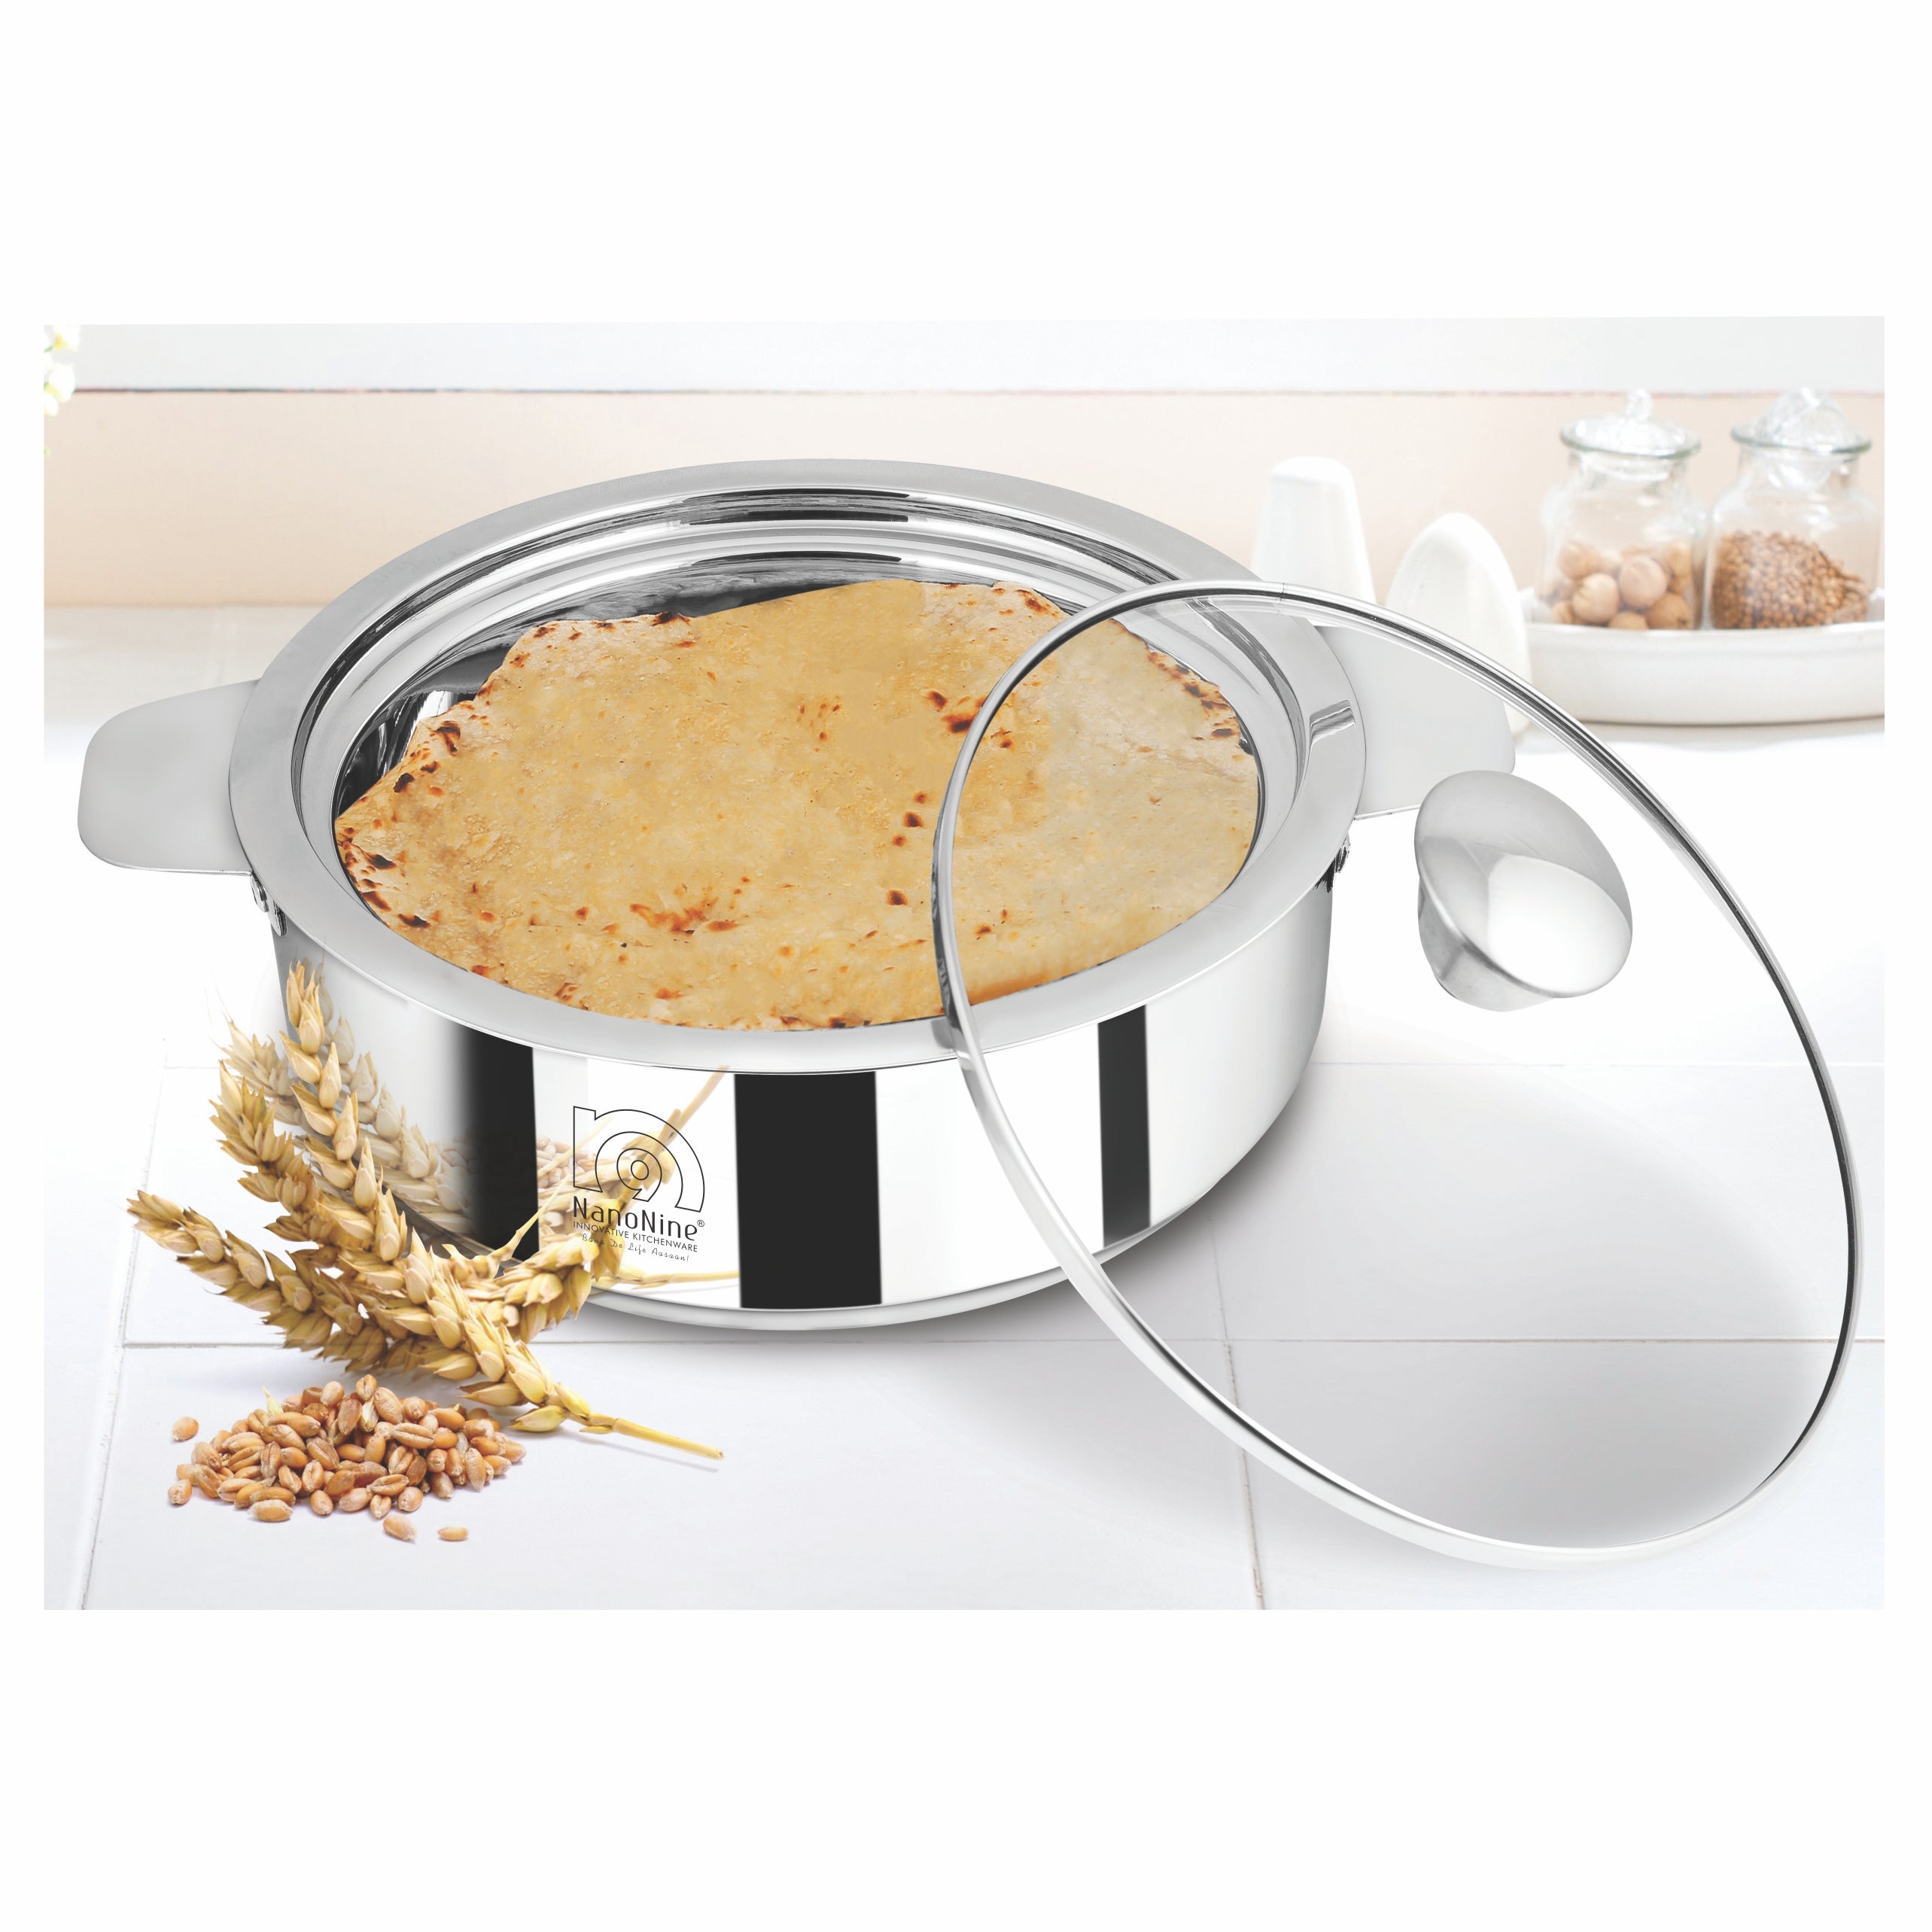 NanoNine Chapati Pot 1.25 L Double Wall Insulated Stainless Steel Serve Fresh Roti Casserole with Glass Lid